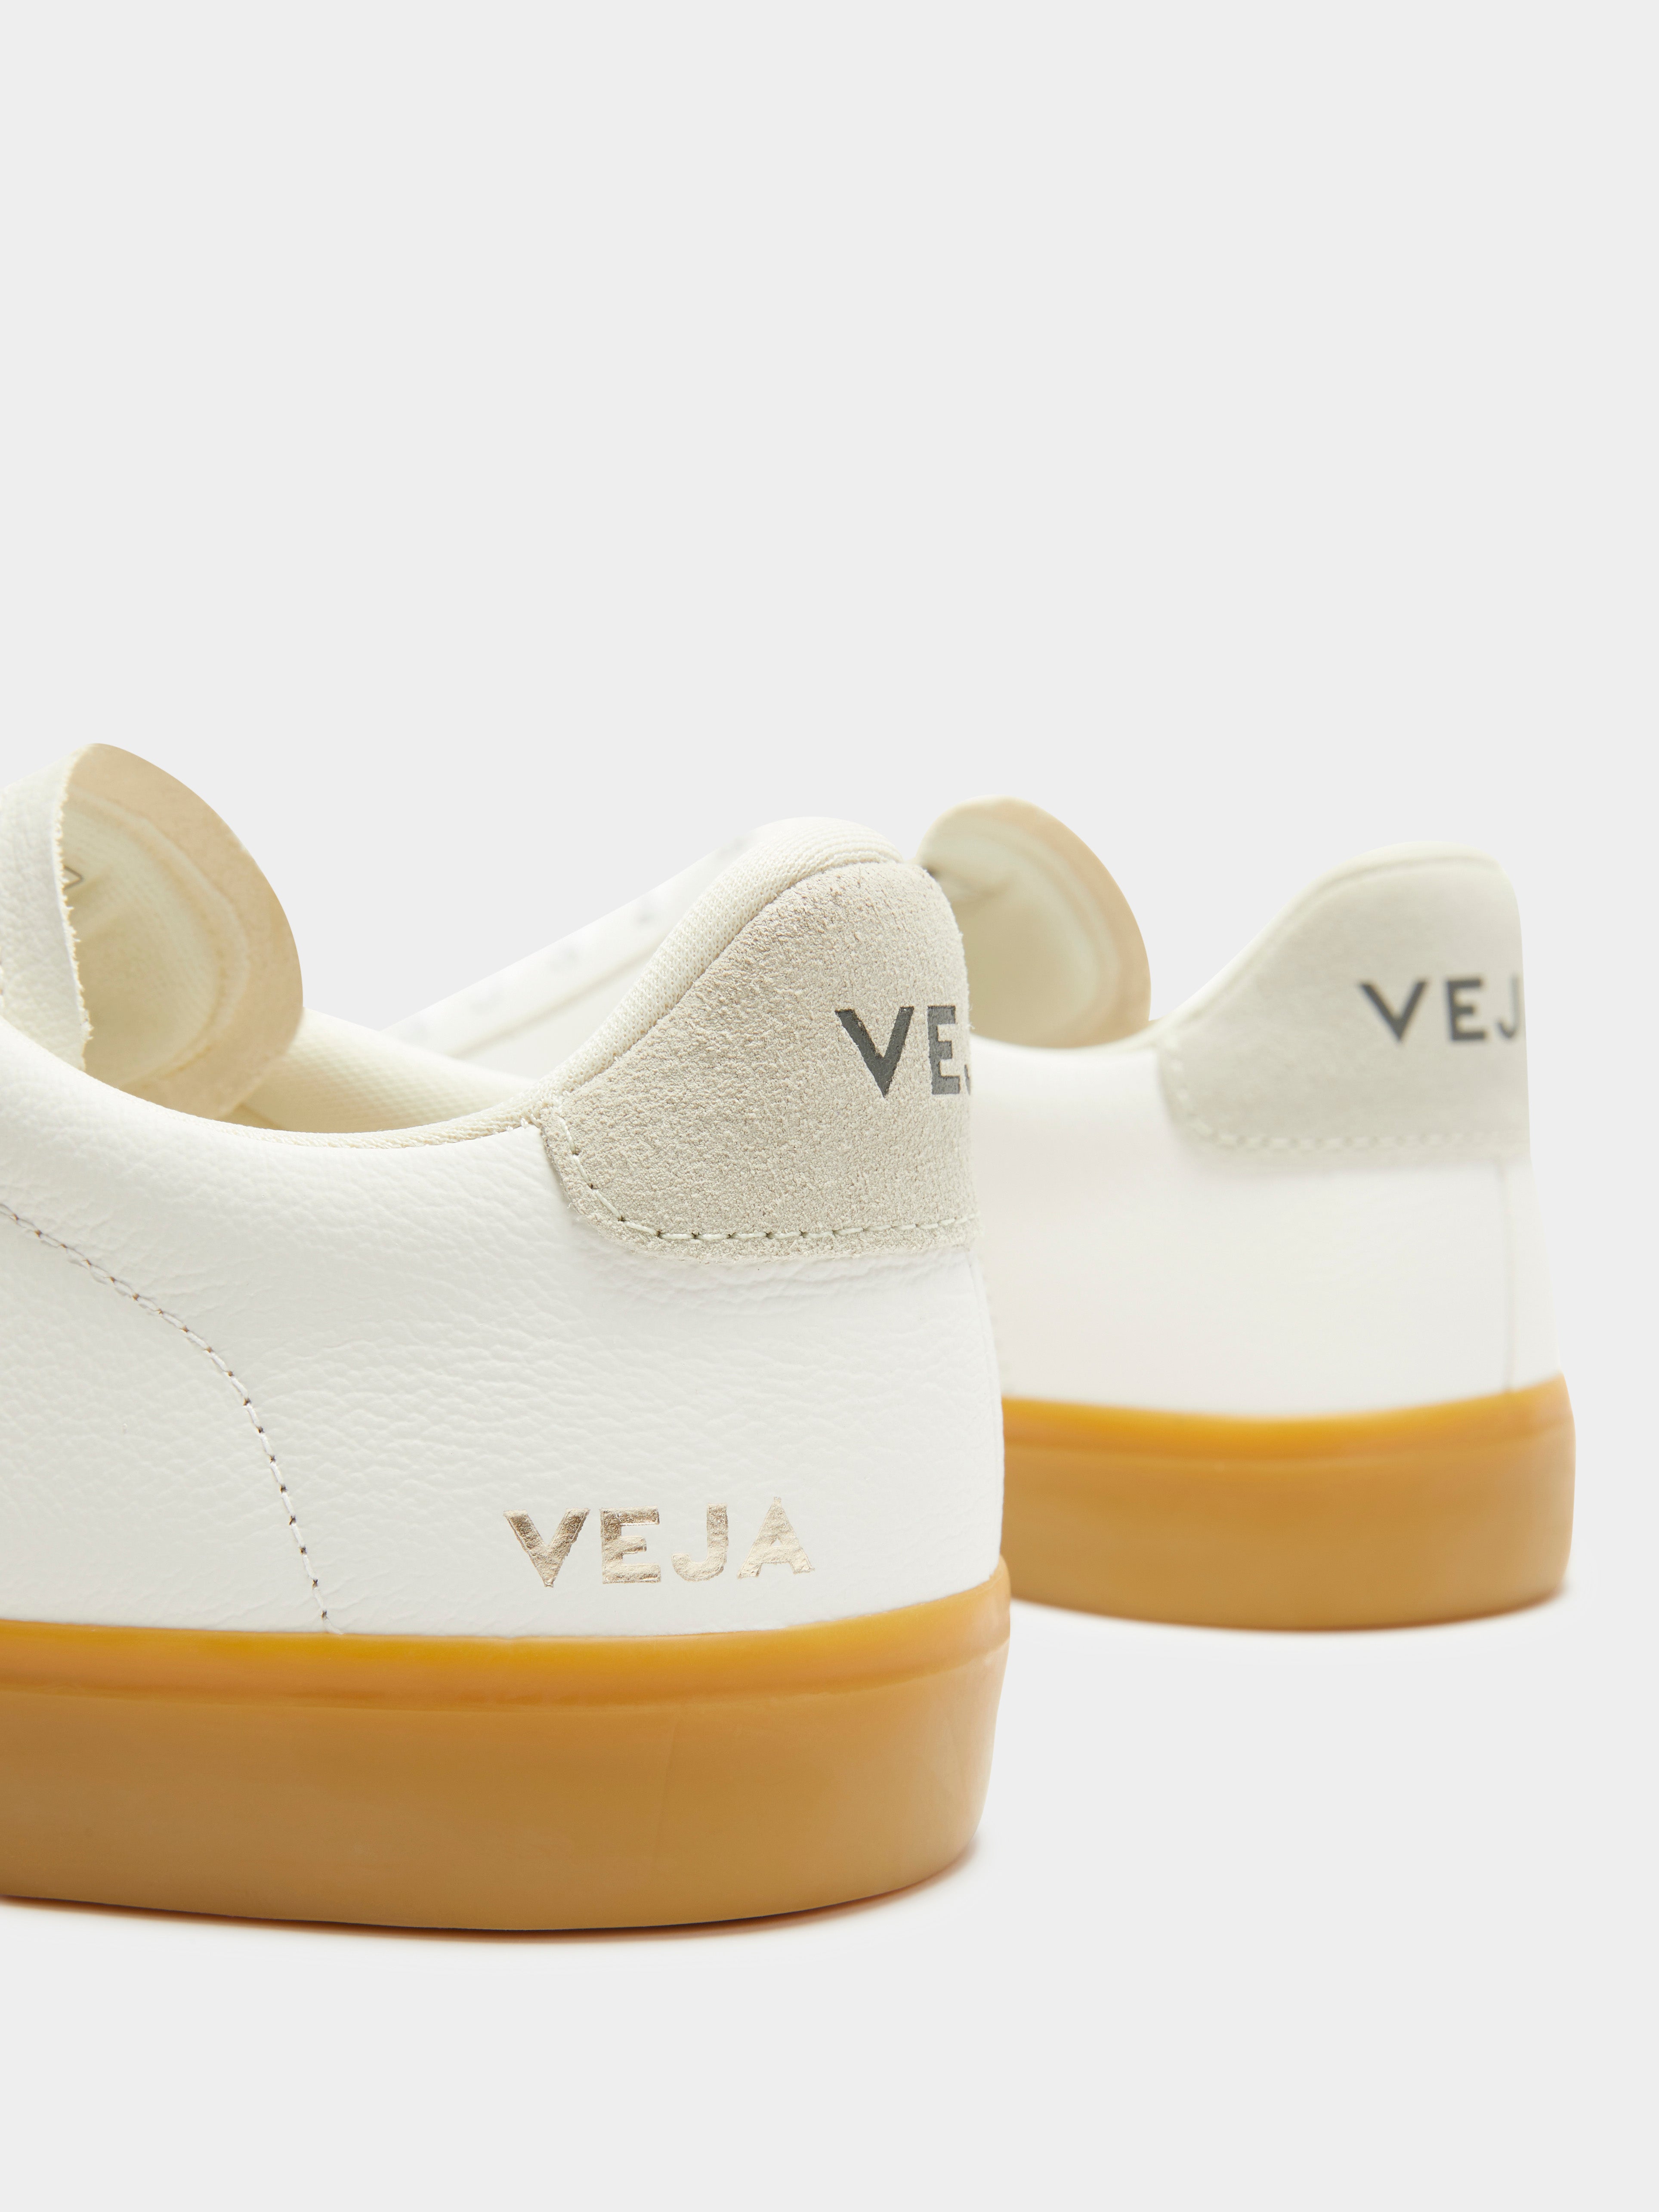 Mens Campo Leather Sneakers in White & Natural Gum